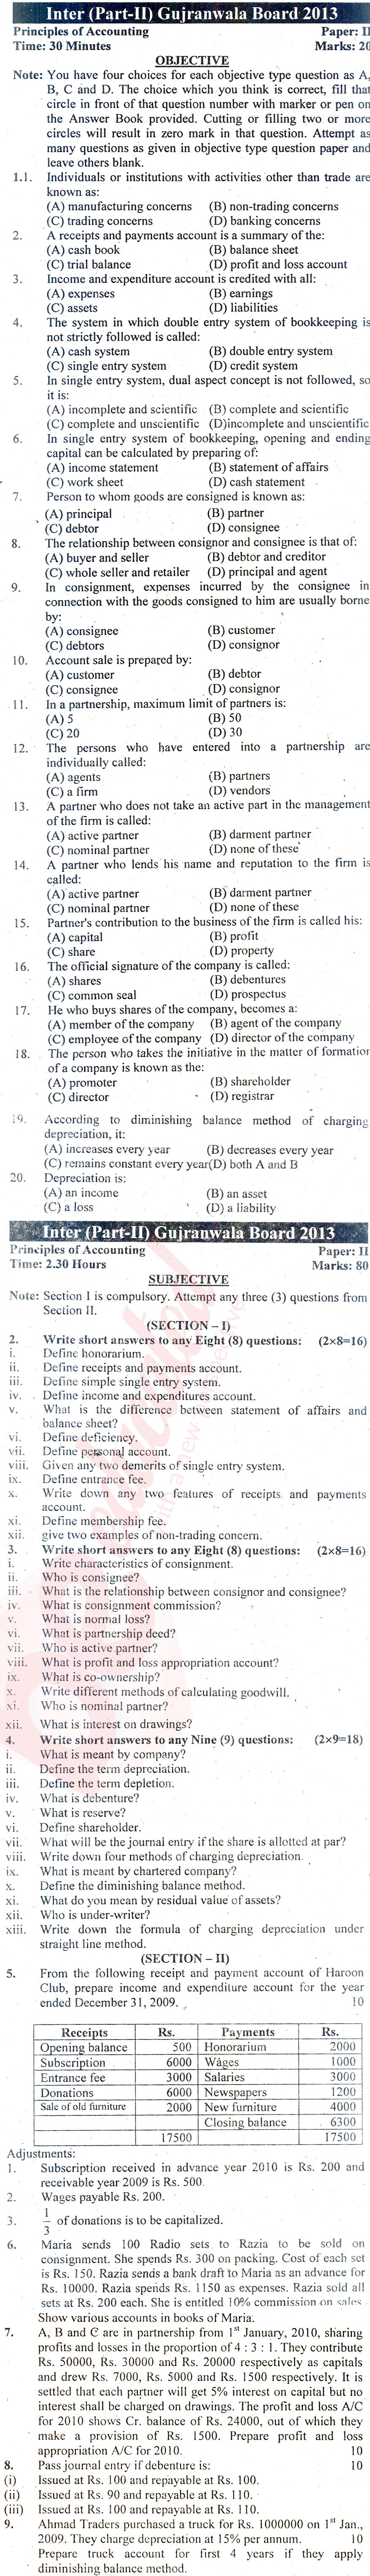 Principles of Accounting ICOM Part 2 Past Paper Group 1 BISE Gujranwala 2013